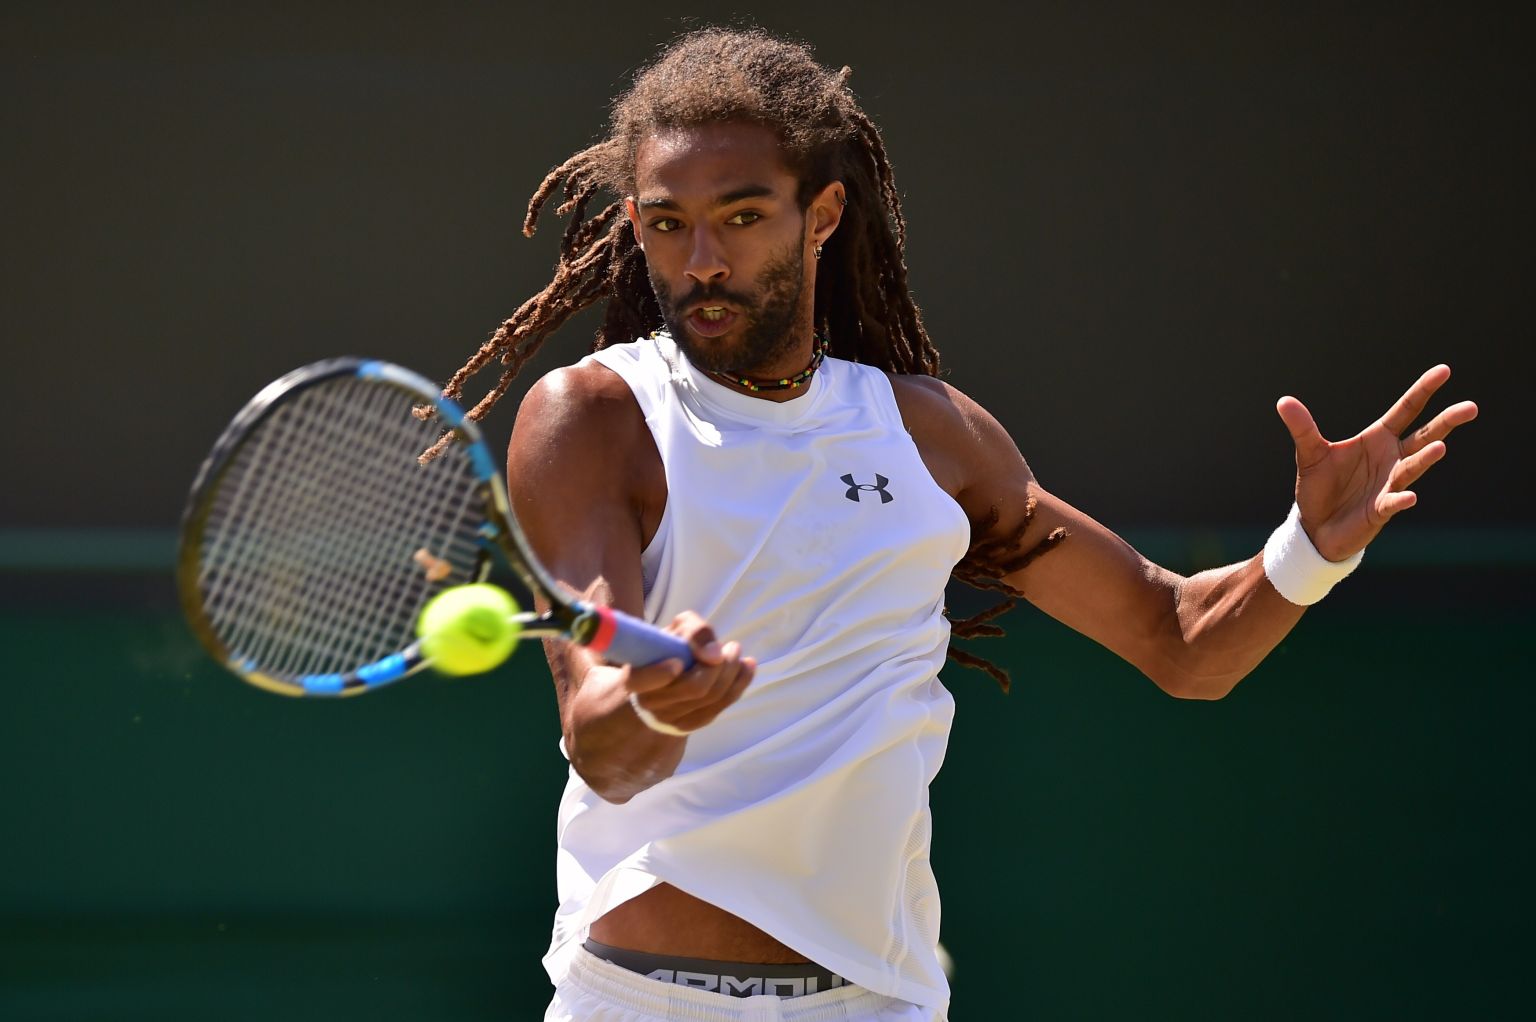 Germany's Dustin Brown returns to Serbia's Viktor Troicki during their men's singles third round match on day six of the 2015 Wimbledon Championships at The All England Tennis Club in Wimbledon, southwest London, on July 4, 2015.   RESTRICTED TO EDITORIAL USE  -- AFP PHOTO / LEON NEAL        (Photo credit should read LEON NEAL/AFP/Getty Images)